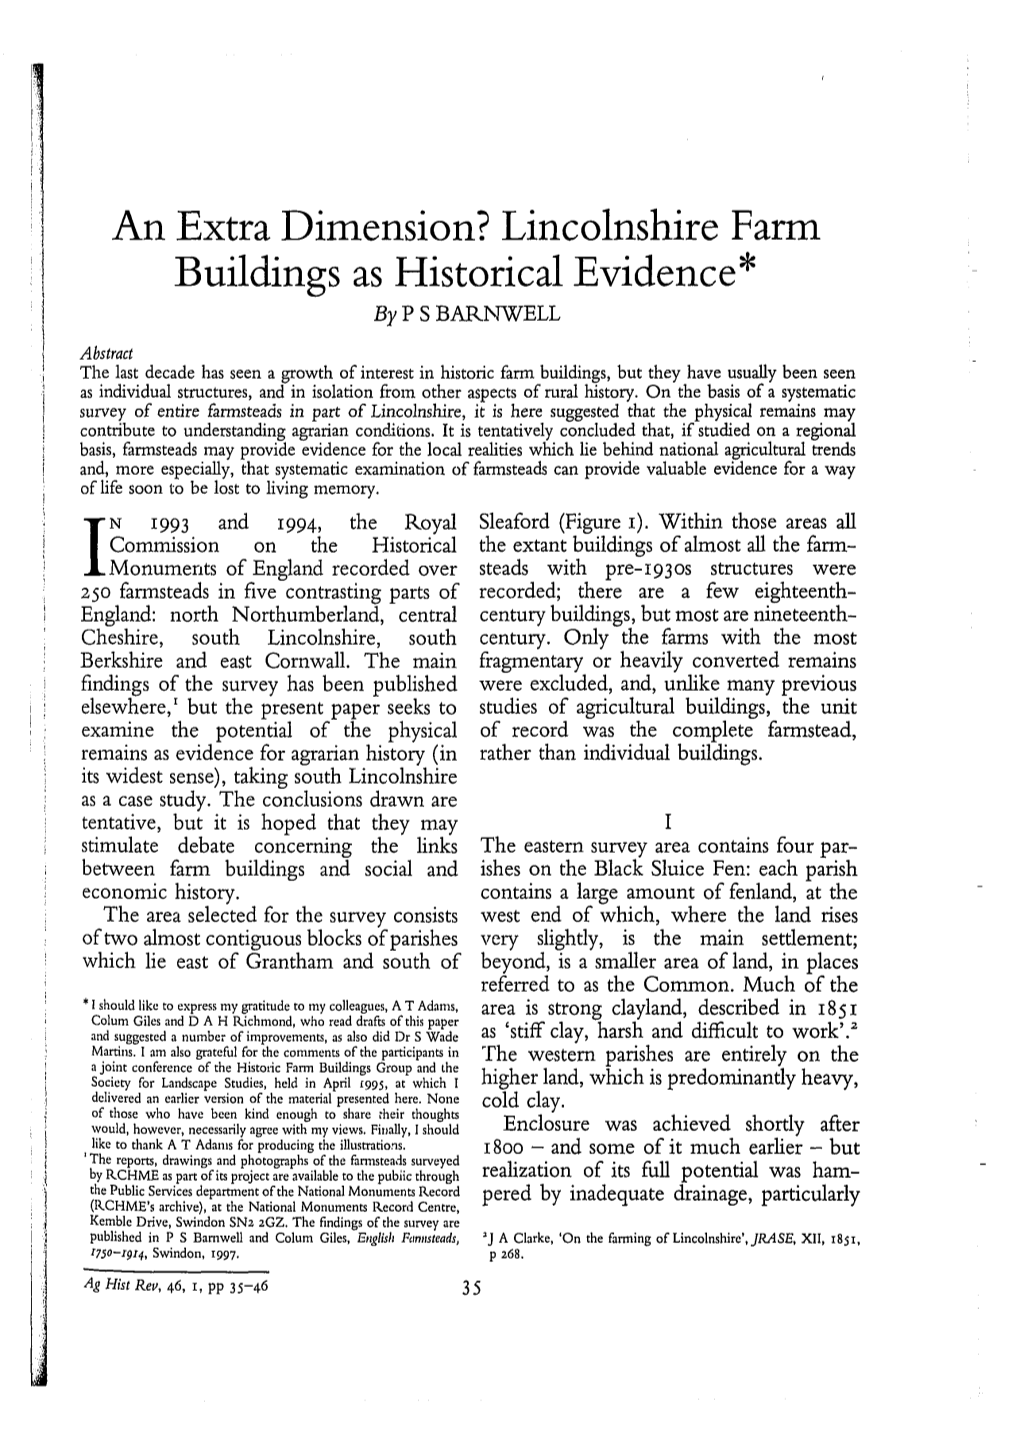 Lincolnshire Farm Buildings As Historical Evidence* by P S BARNWELL